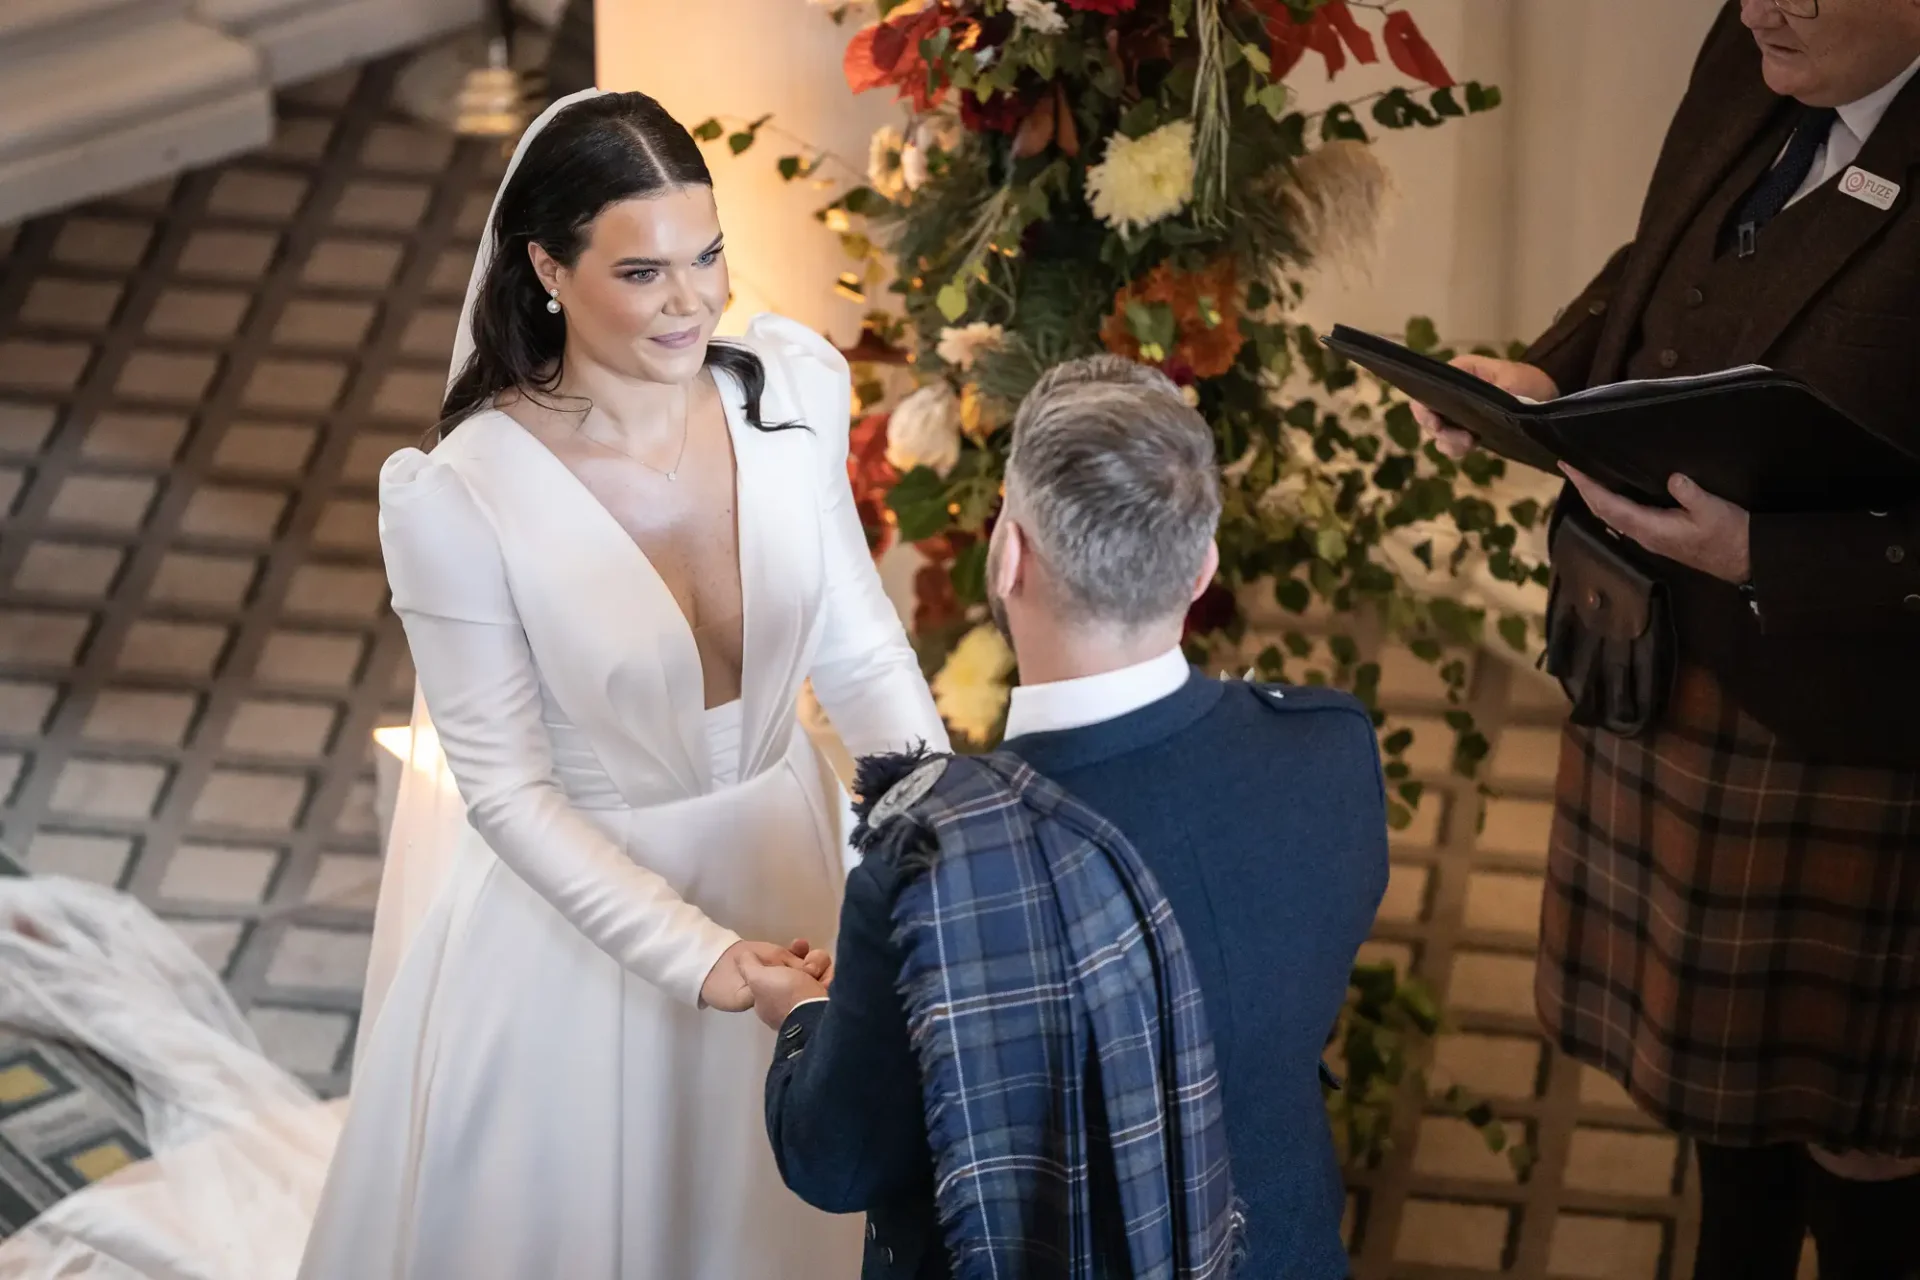 A bride in a white dress stands facing the groom in a tartan kilt during their wedding ceremony, with an officiant on the right.